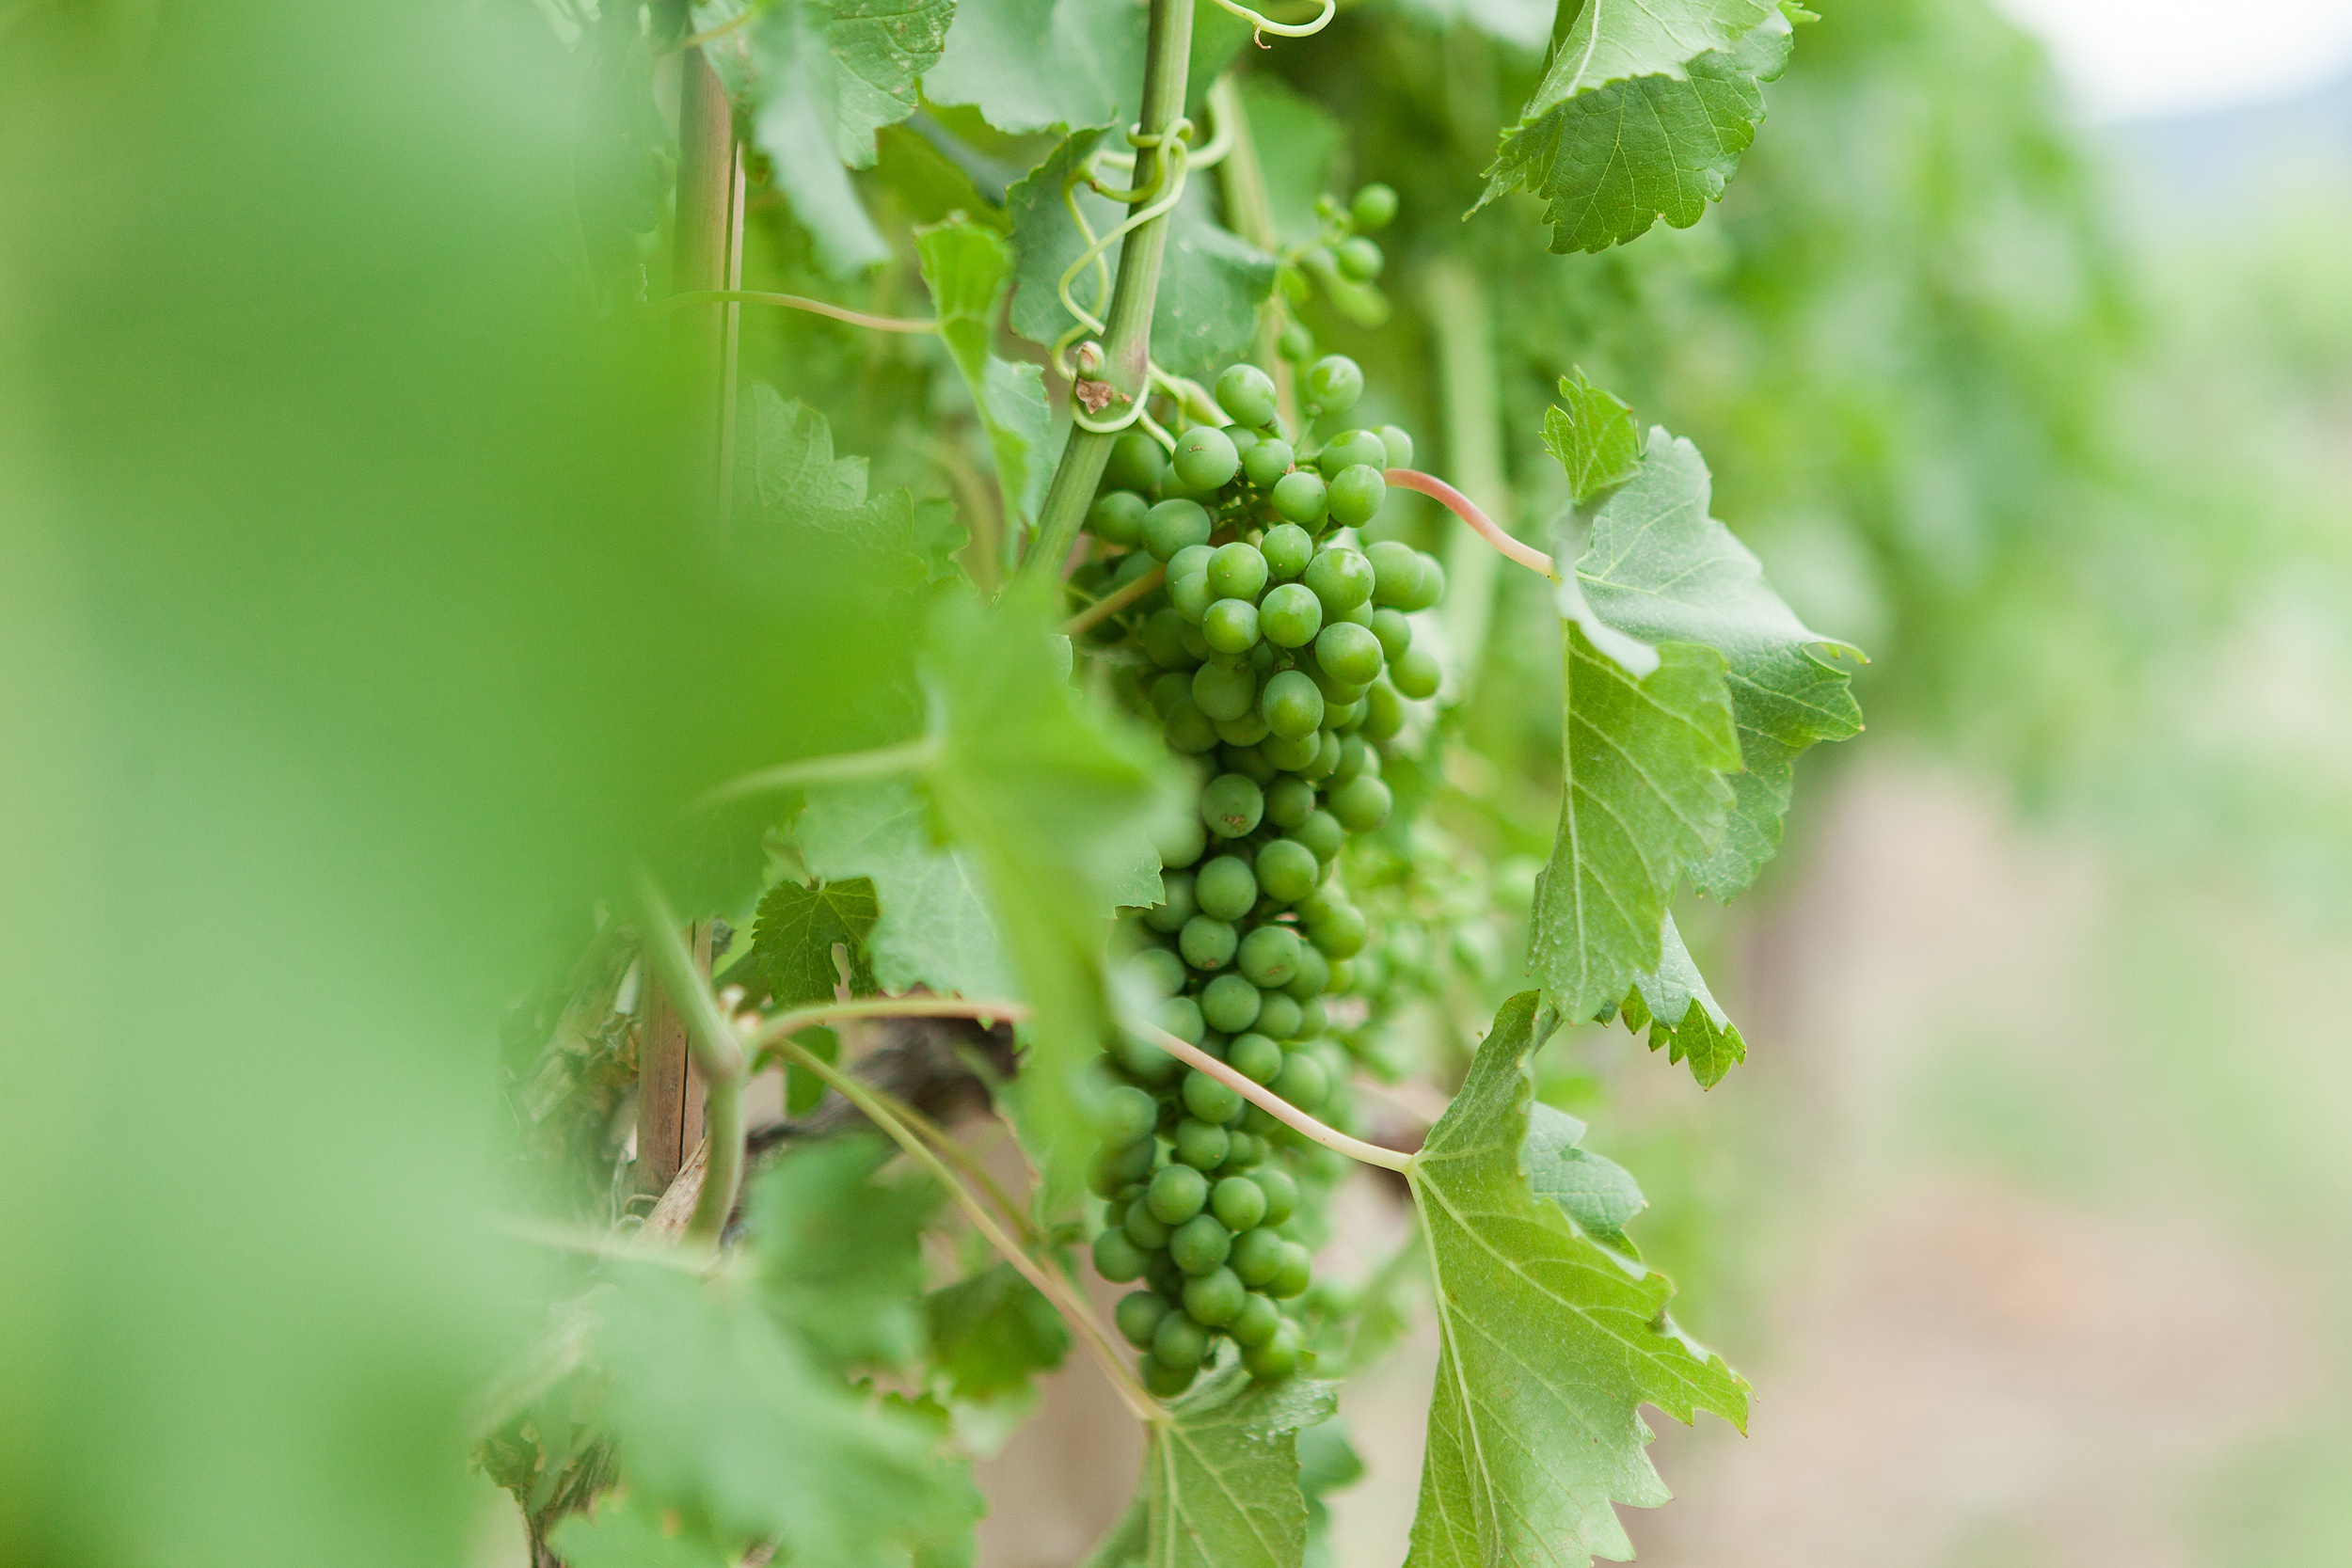 green grapes hang from a vine